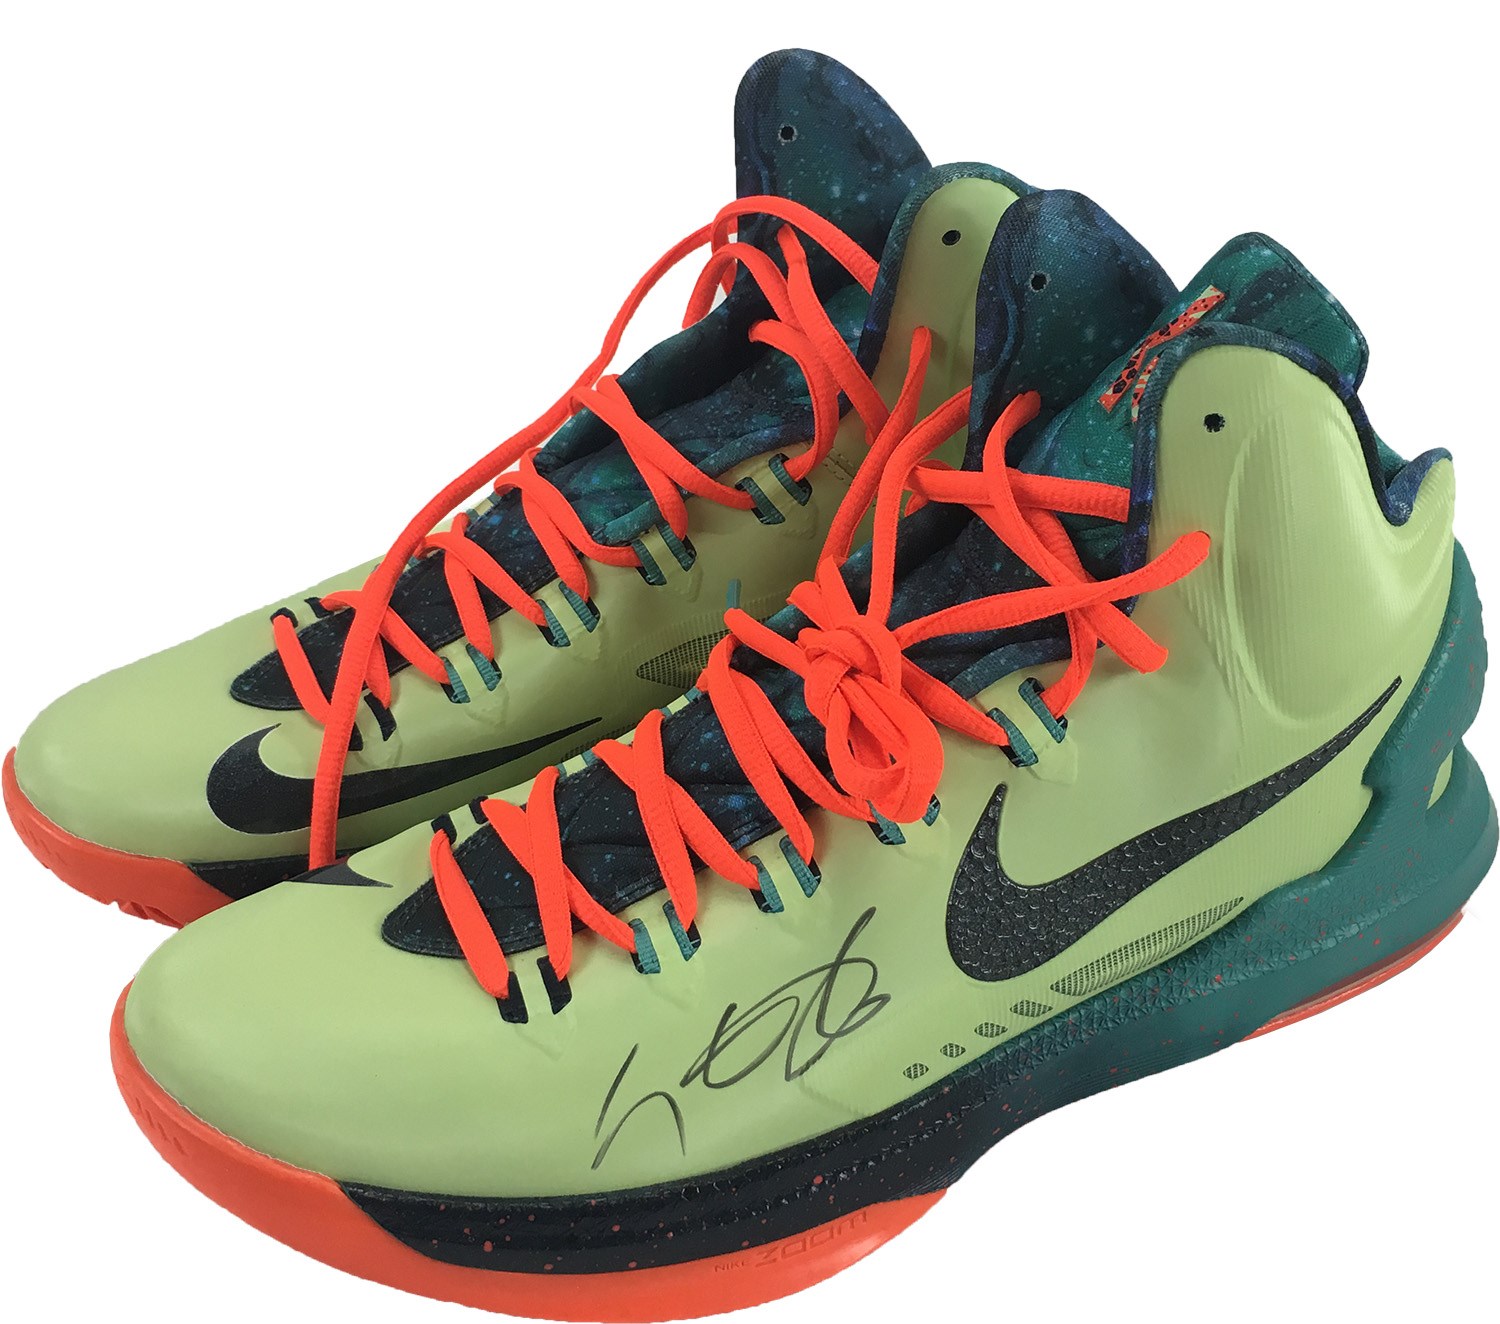 Basketball - Kevin Durant Signed All Star Orange Army Sneakers (PSA)